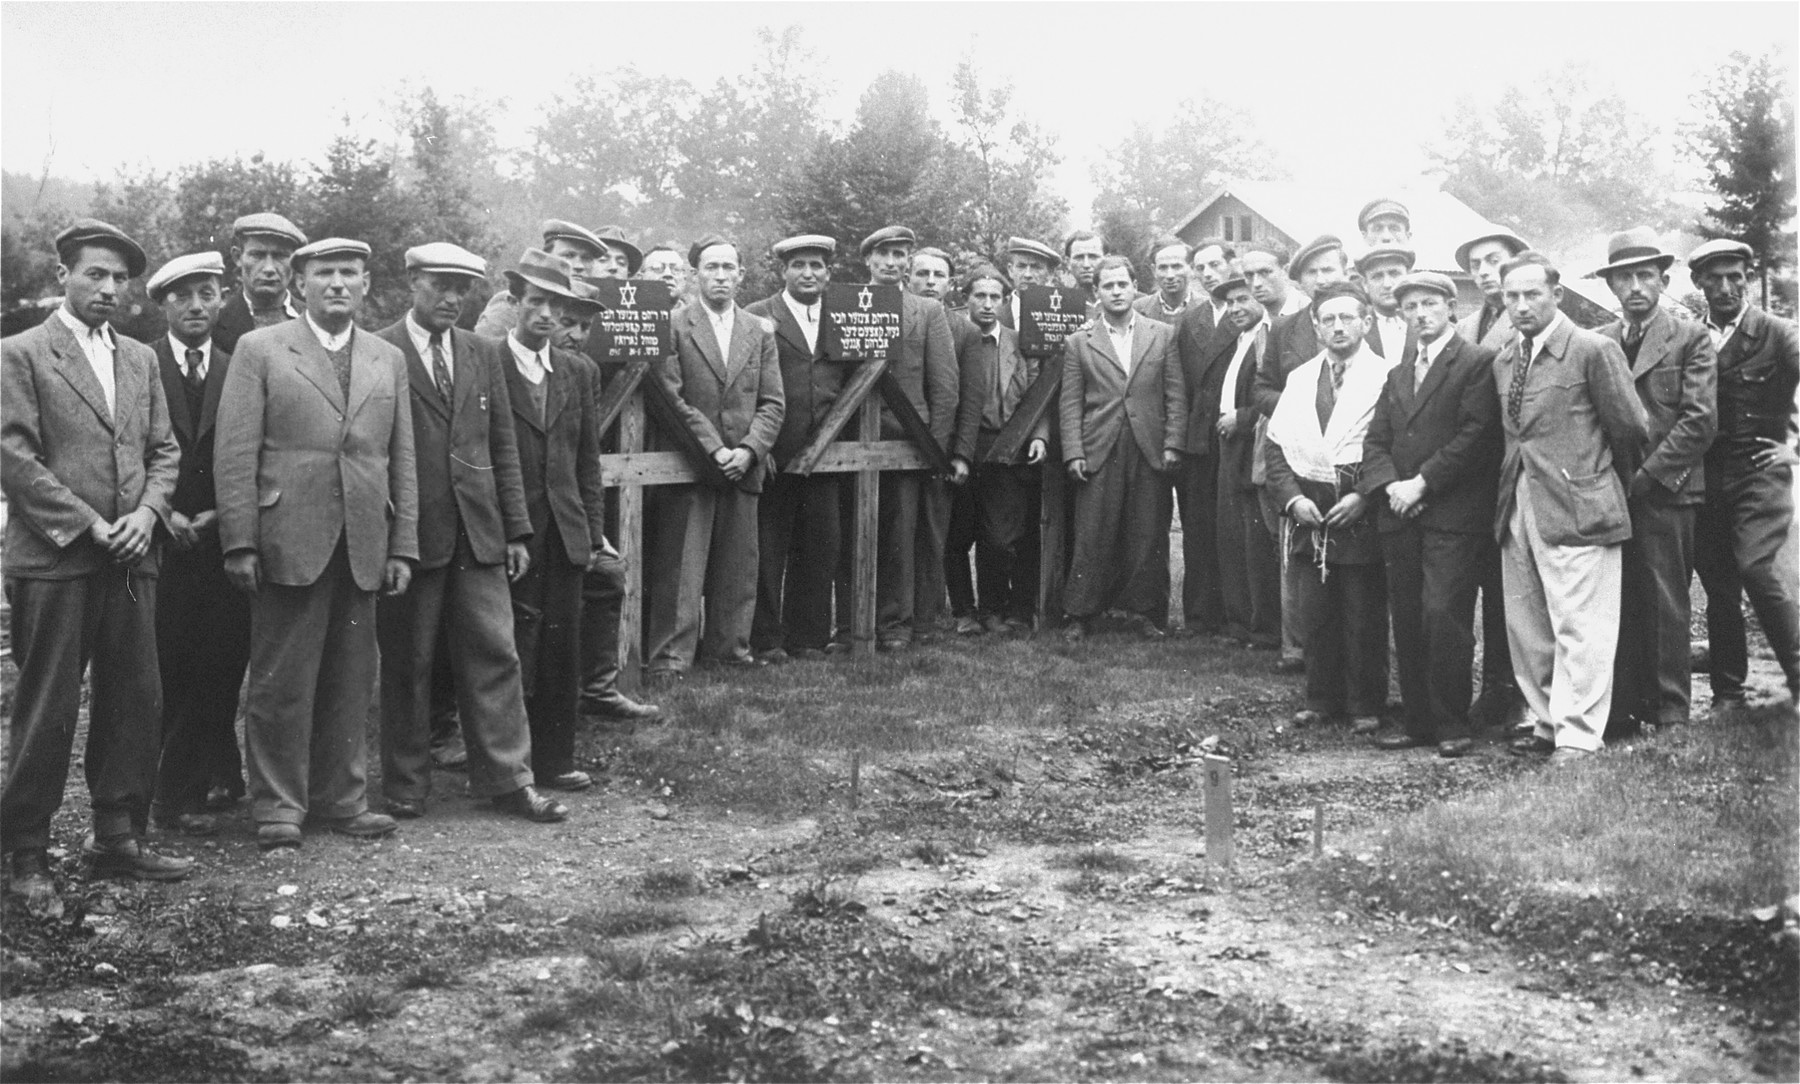 Jewish DPs gather for a memorial service in the Traunstein displaced persons camp.

Those pictured include Yankel Yakubovitz (the tall man in the center) and his brother, Aaron Yakubovitz. Pictured in the center, looking over the left shoulder of Yankel Yakubovitz is Chaim Cichowicz (later Herman Cane).